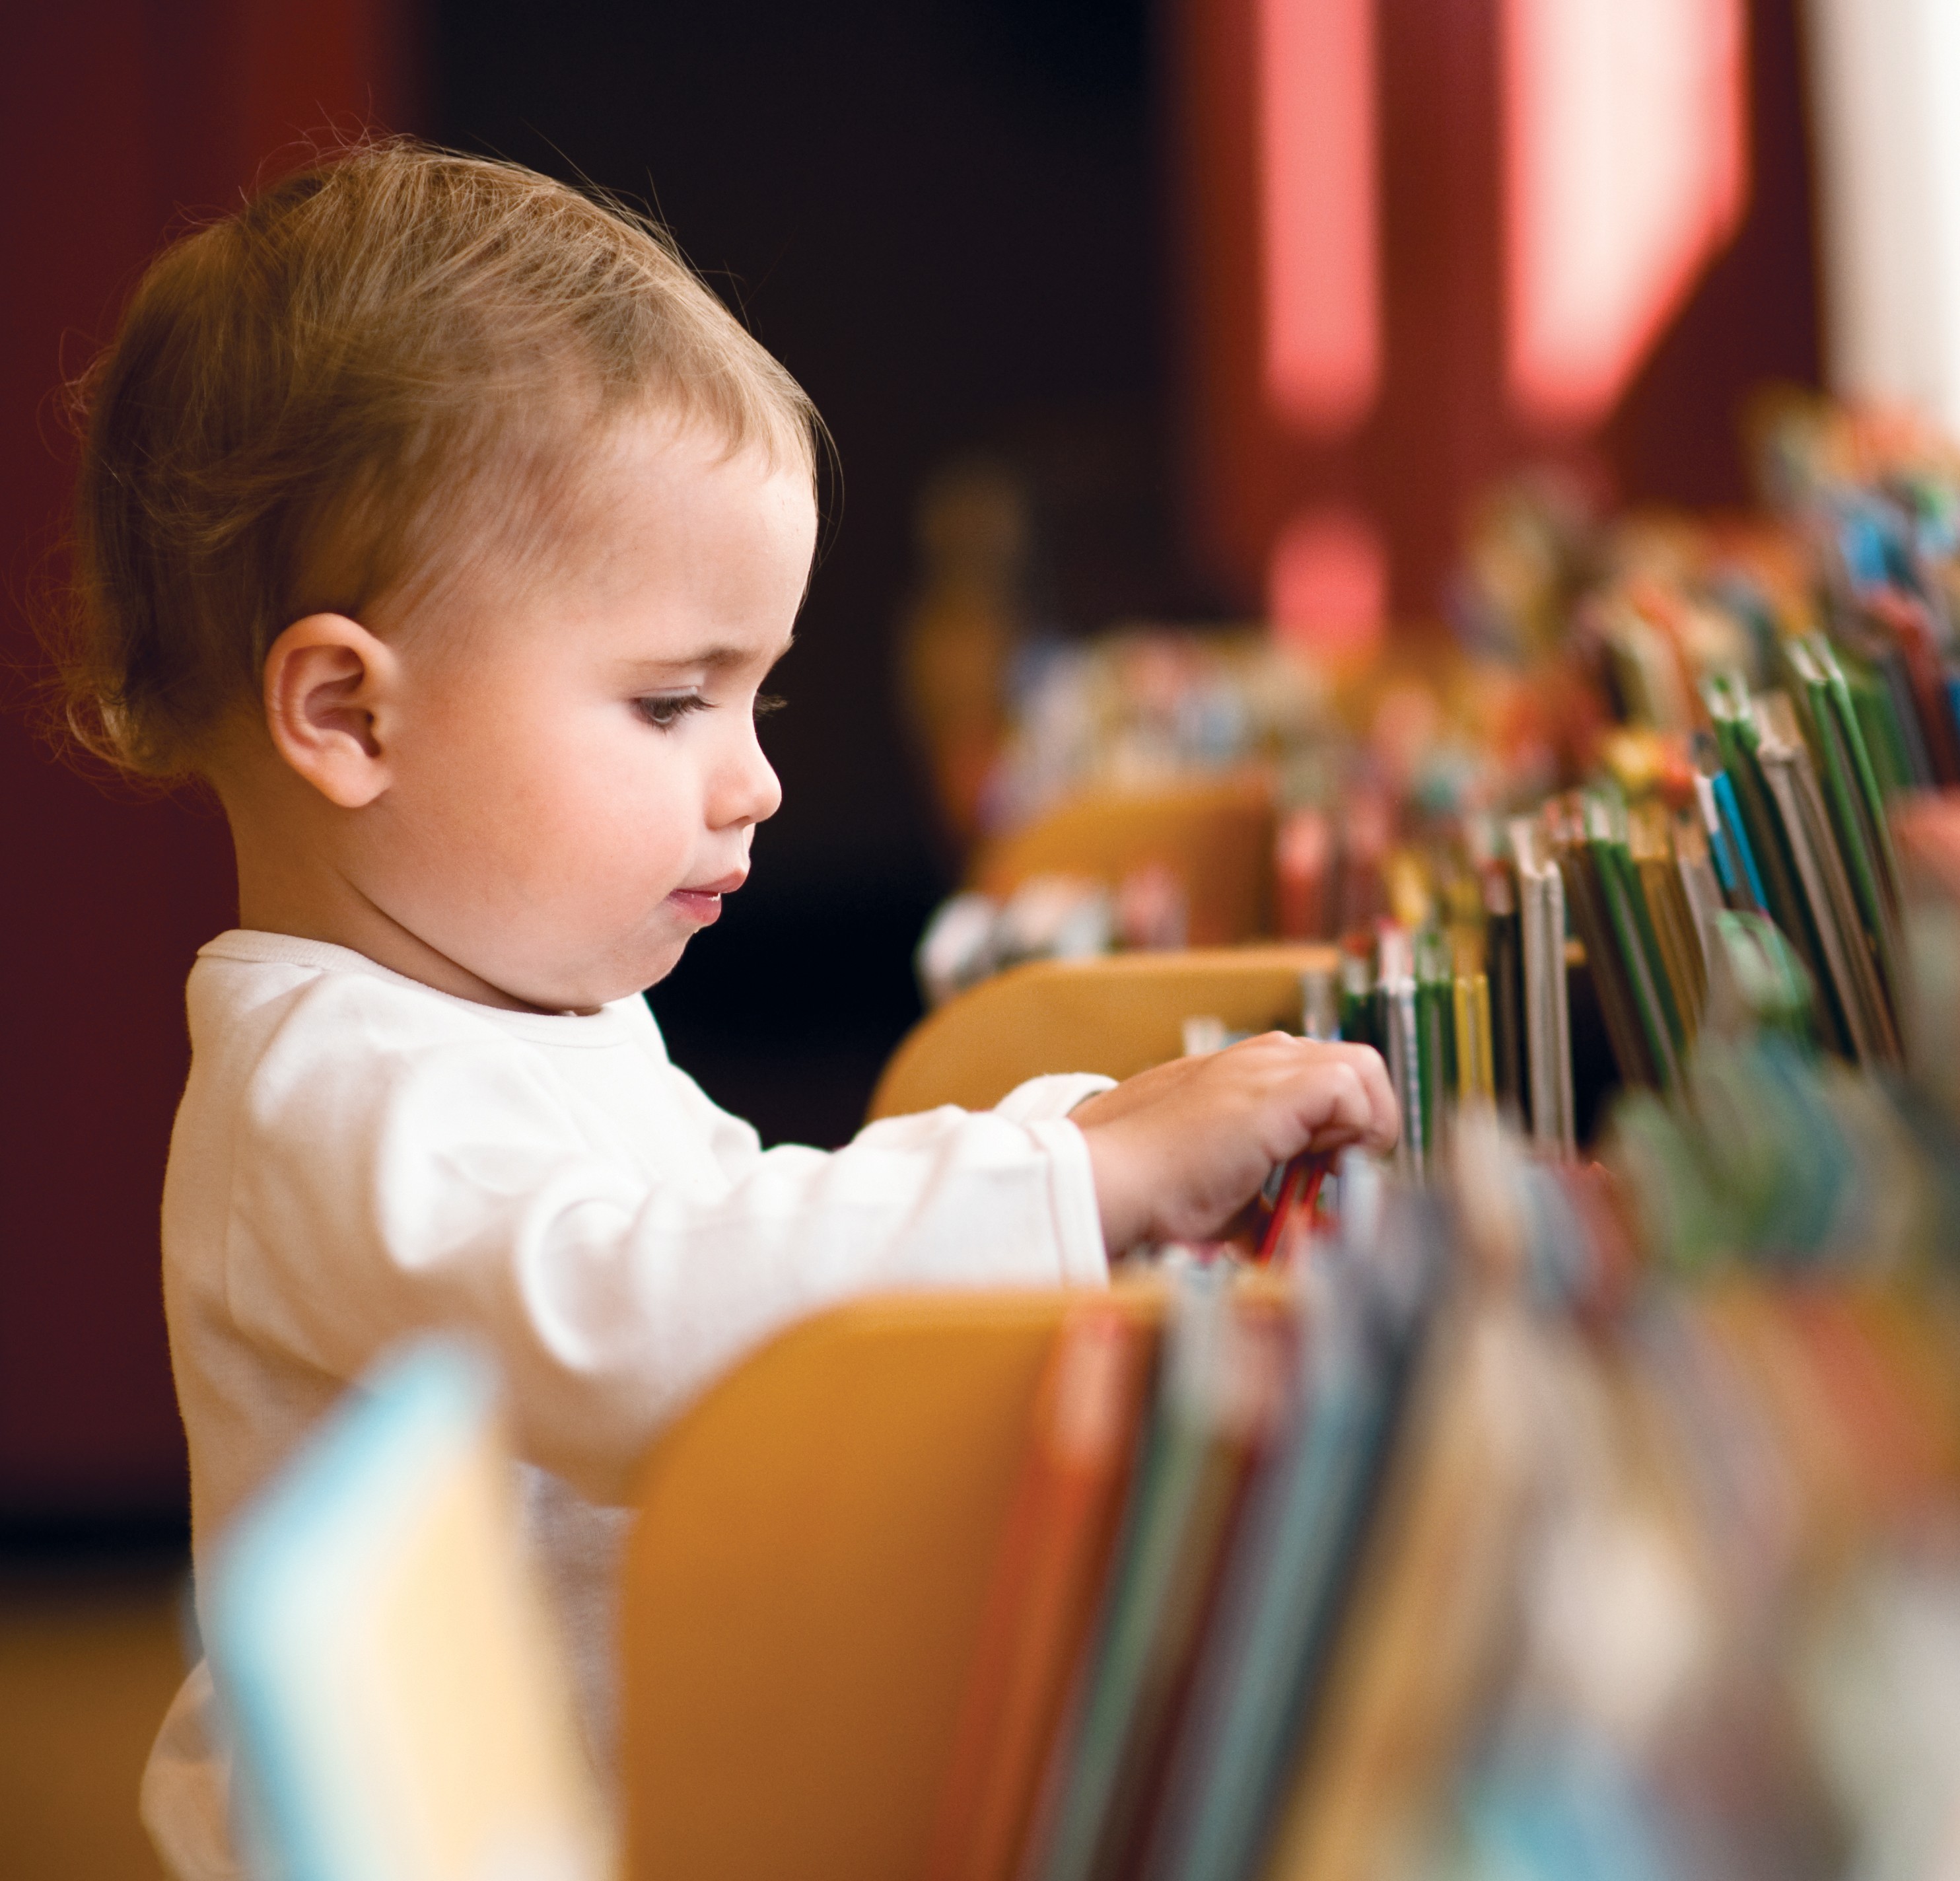 Little girl flicking trough books in a library. Natural light. (Foto: Getty Images)